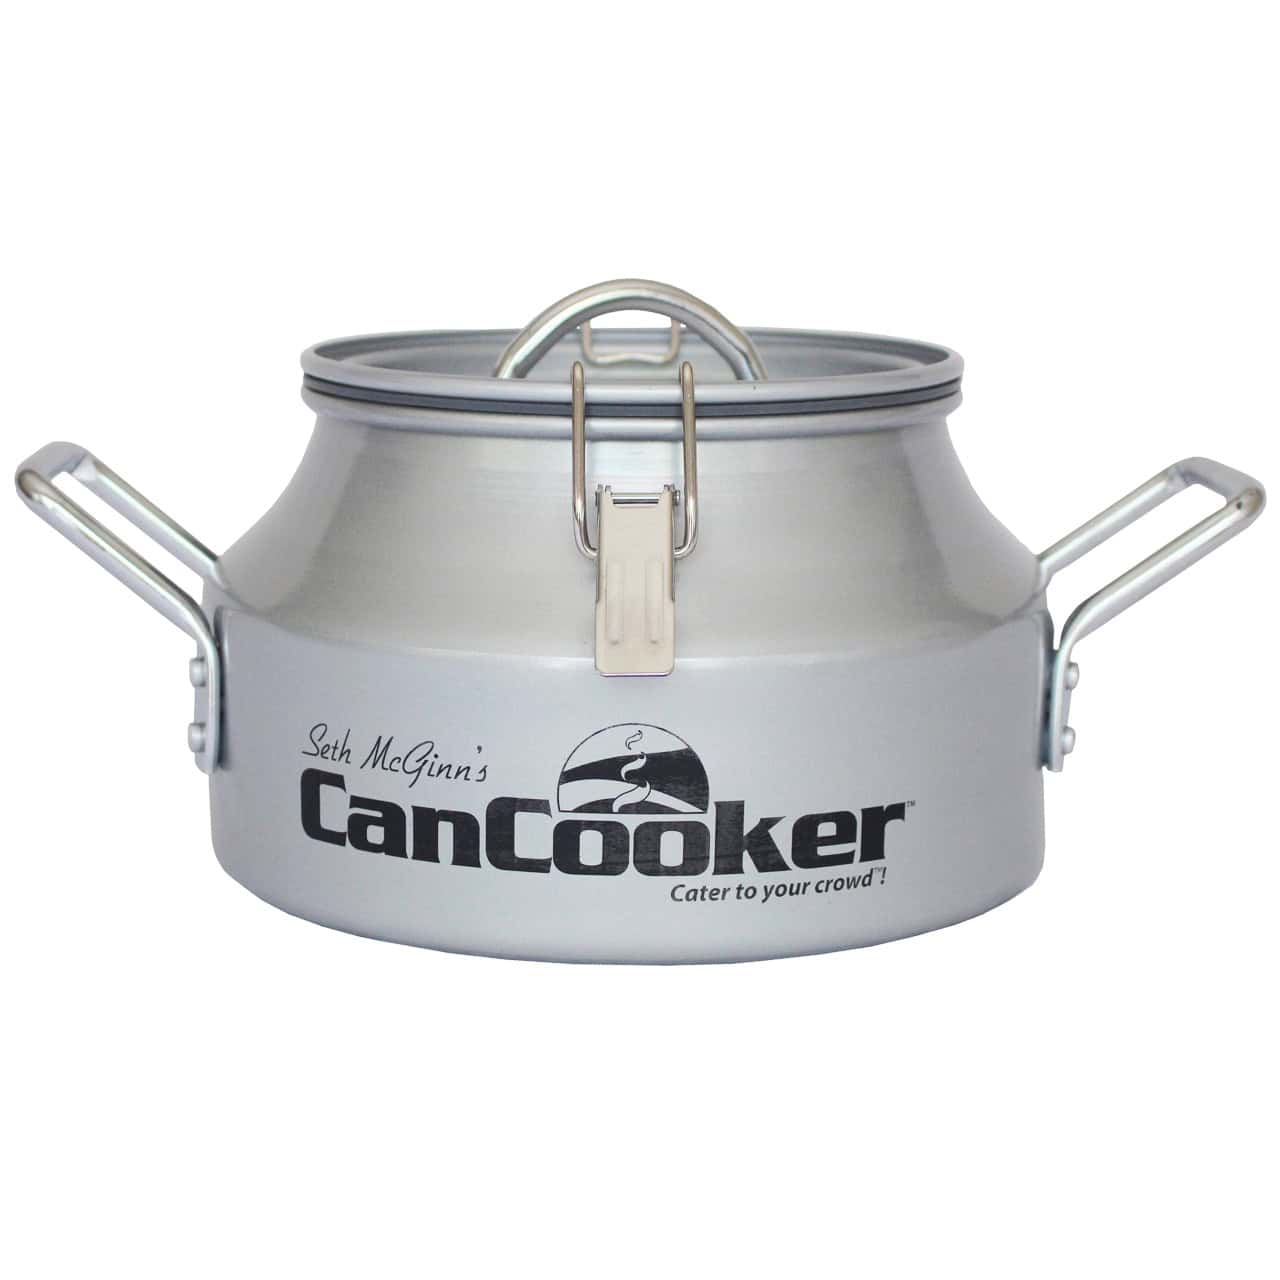 https://www.cancooker.com/wp-content/uploads/2020/09/products-CanCooker_Companion_-1280X1280-noBackground__04662.1507081579__83981.1601415175.1280.1280.jpg